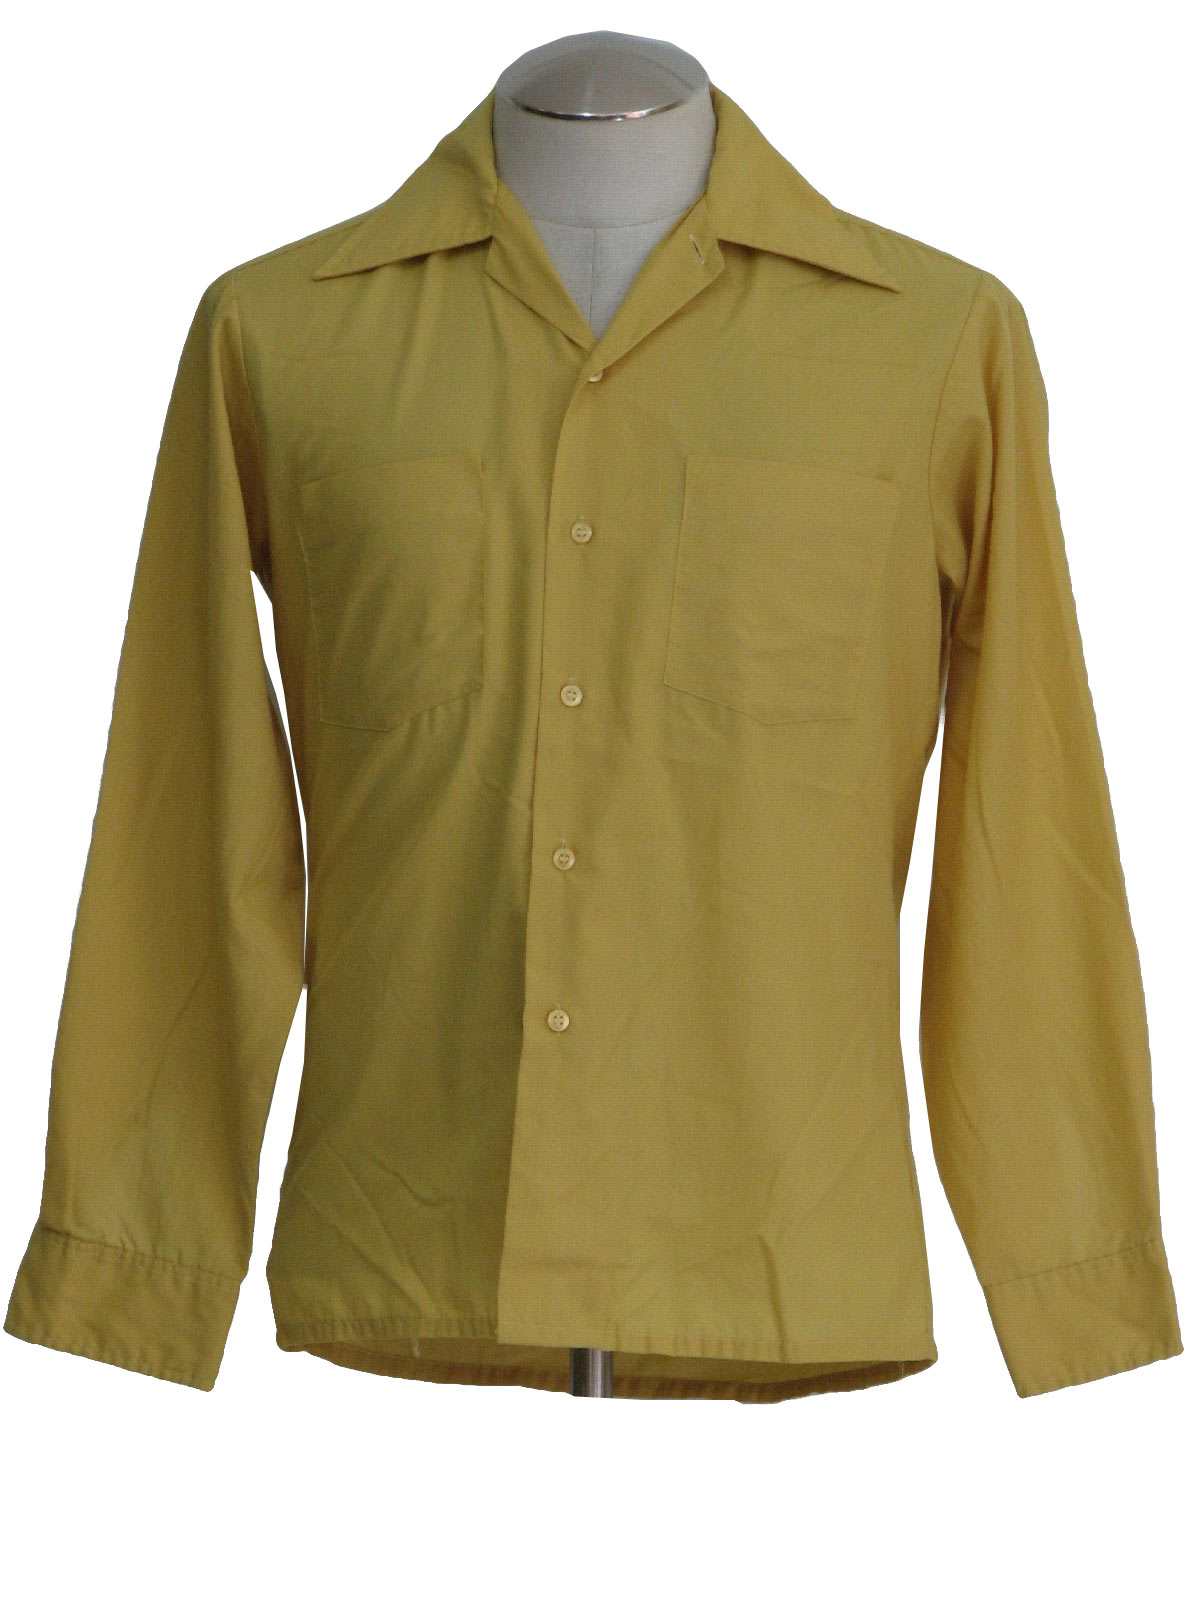 1970's Vintage Towncraft Shirt: 70s -Towncraft- Mens mustard yellow ...